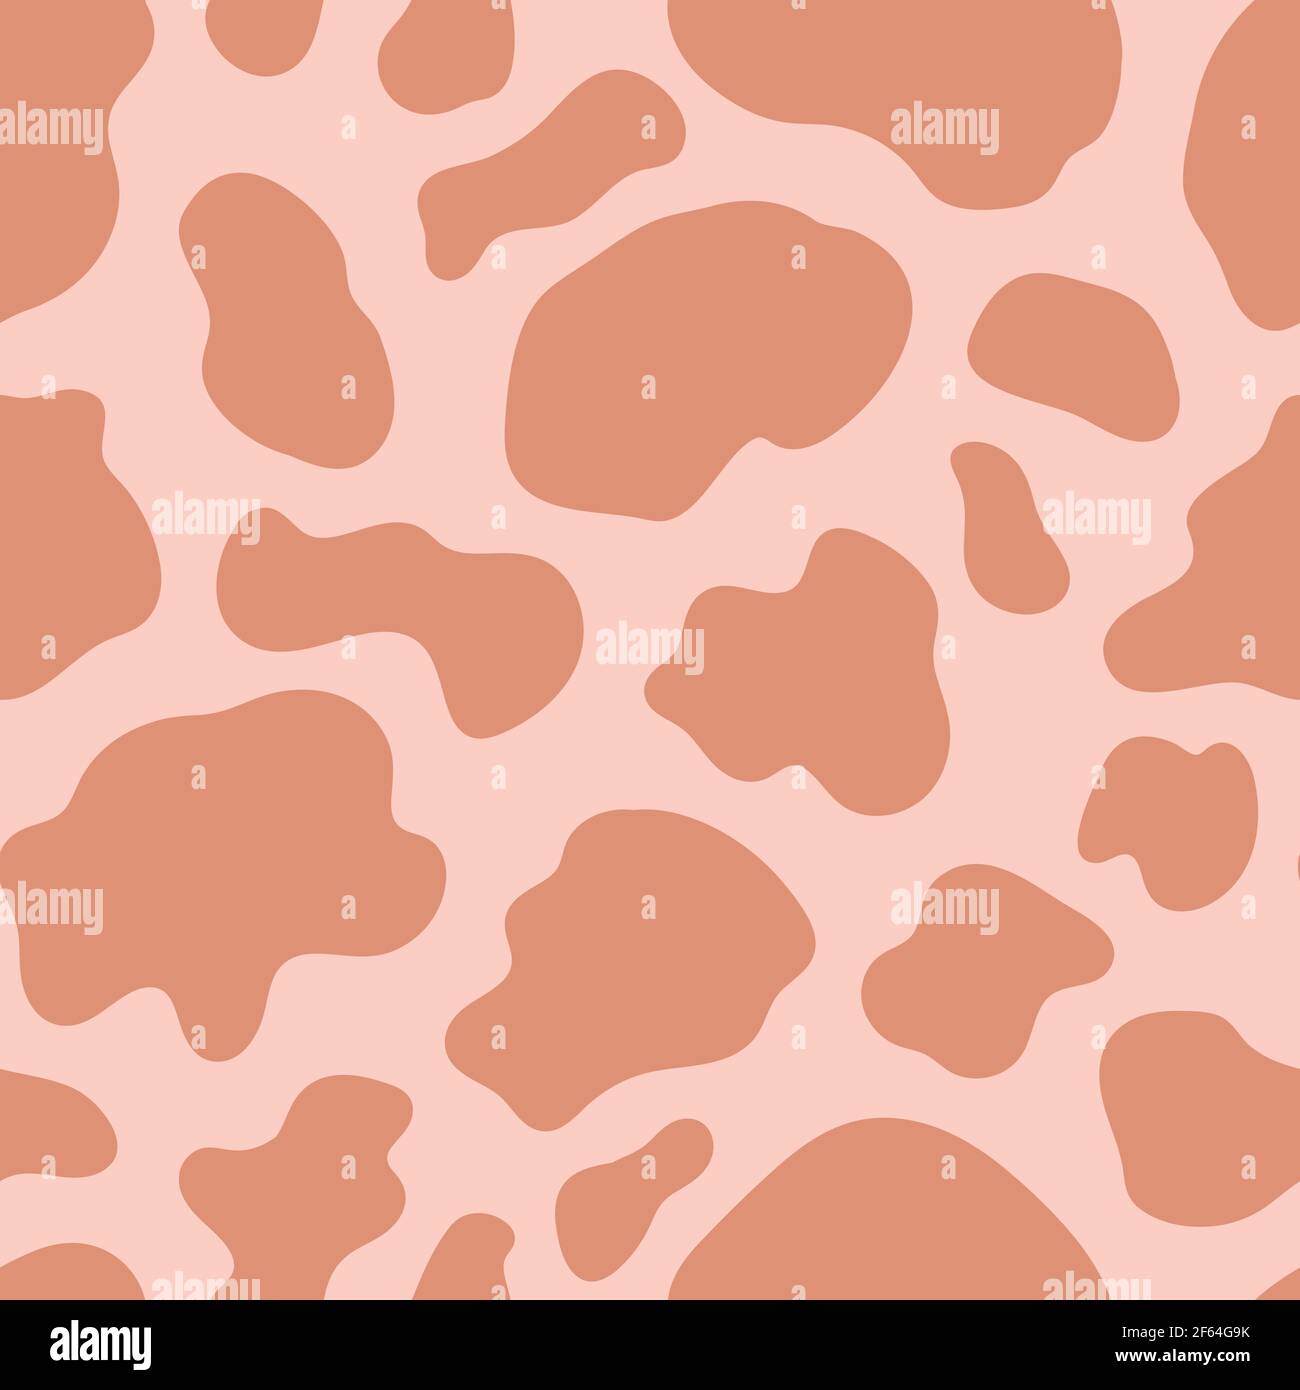 Pink Cow Print wallpaper by Mdog1020  Download on ZEDGE  f26d